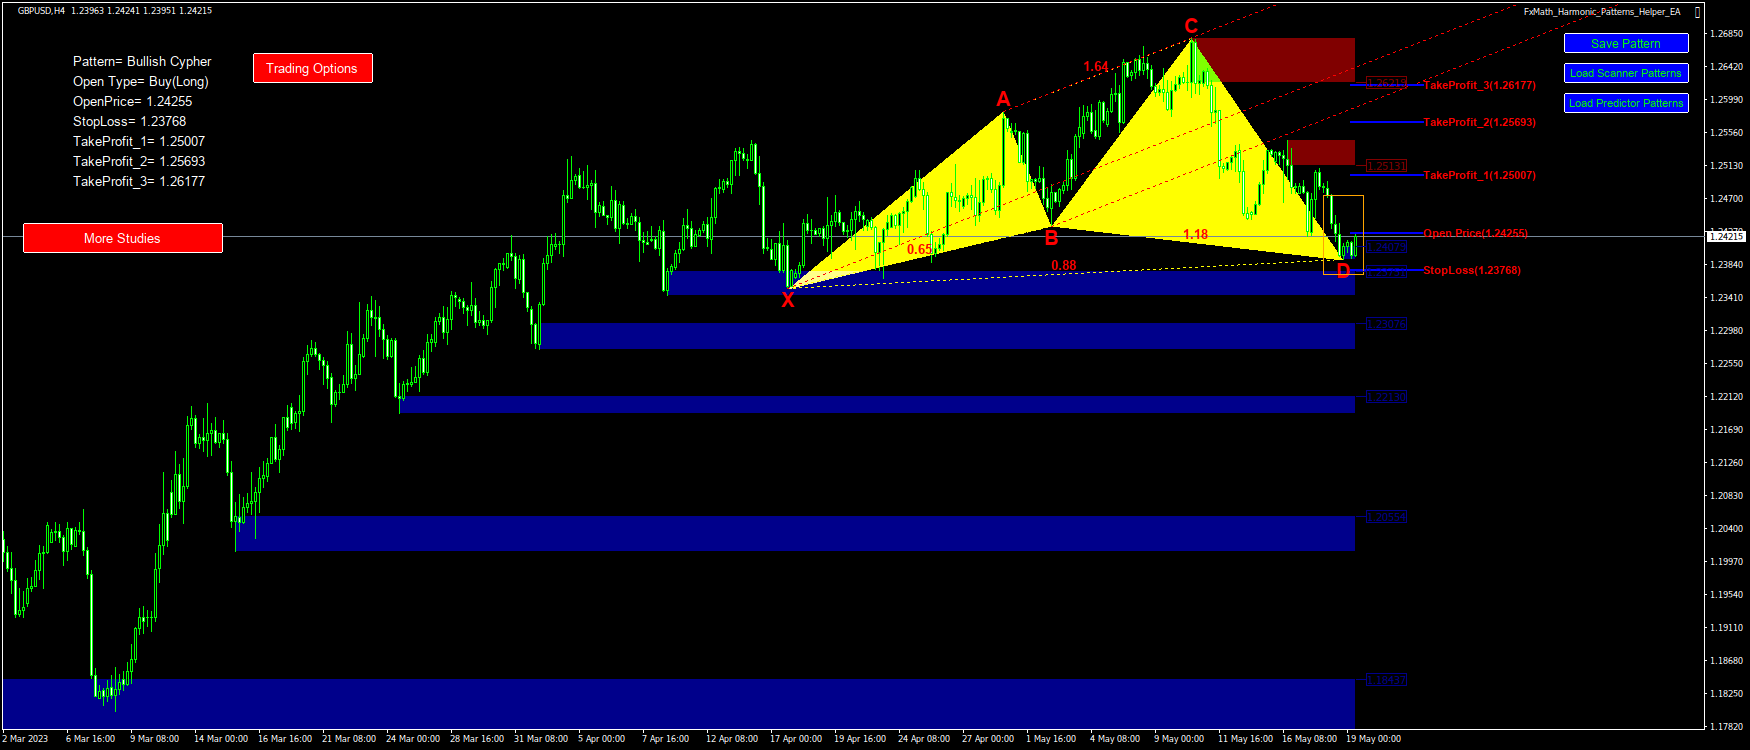 @GBPUSD(H4)-Pattern: Cypher : BuyStop@: 1.24255, StopLoss: 1.23768, TakeProfit_1: 1.25007, TakeProfit_2: 1.25693, TakeProfit_3: 1.26177-2023.05.19 09:24